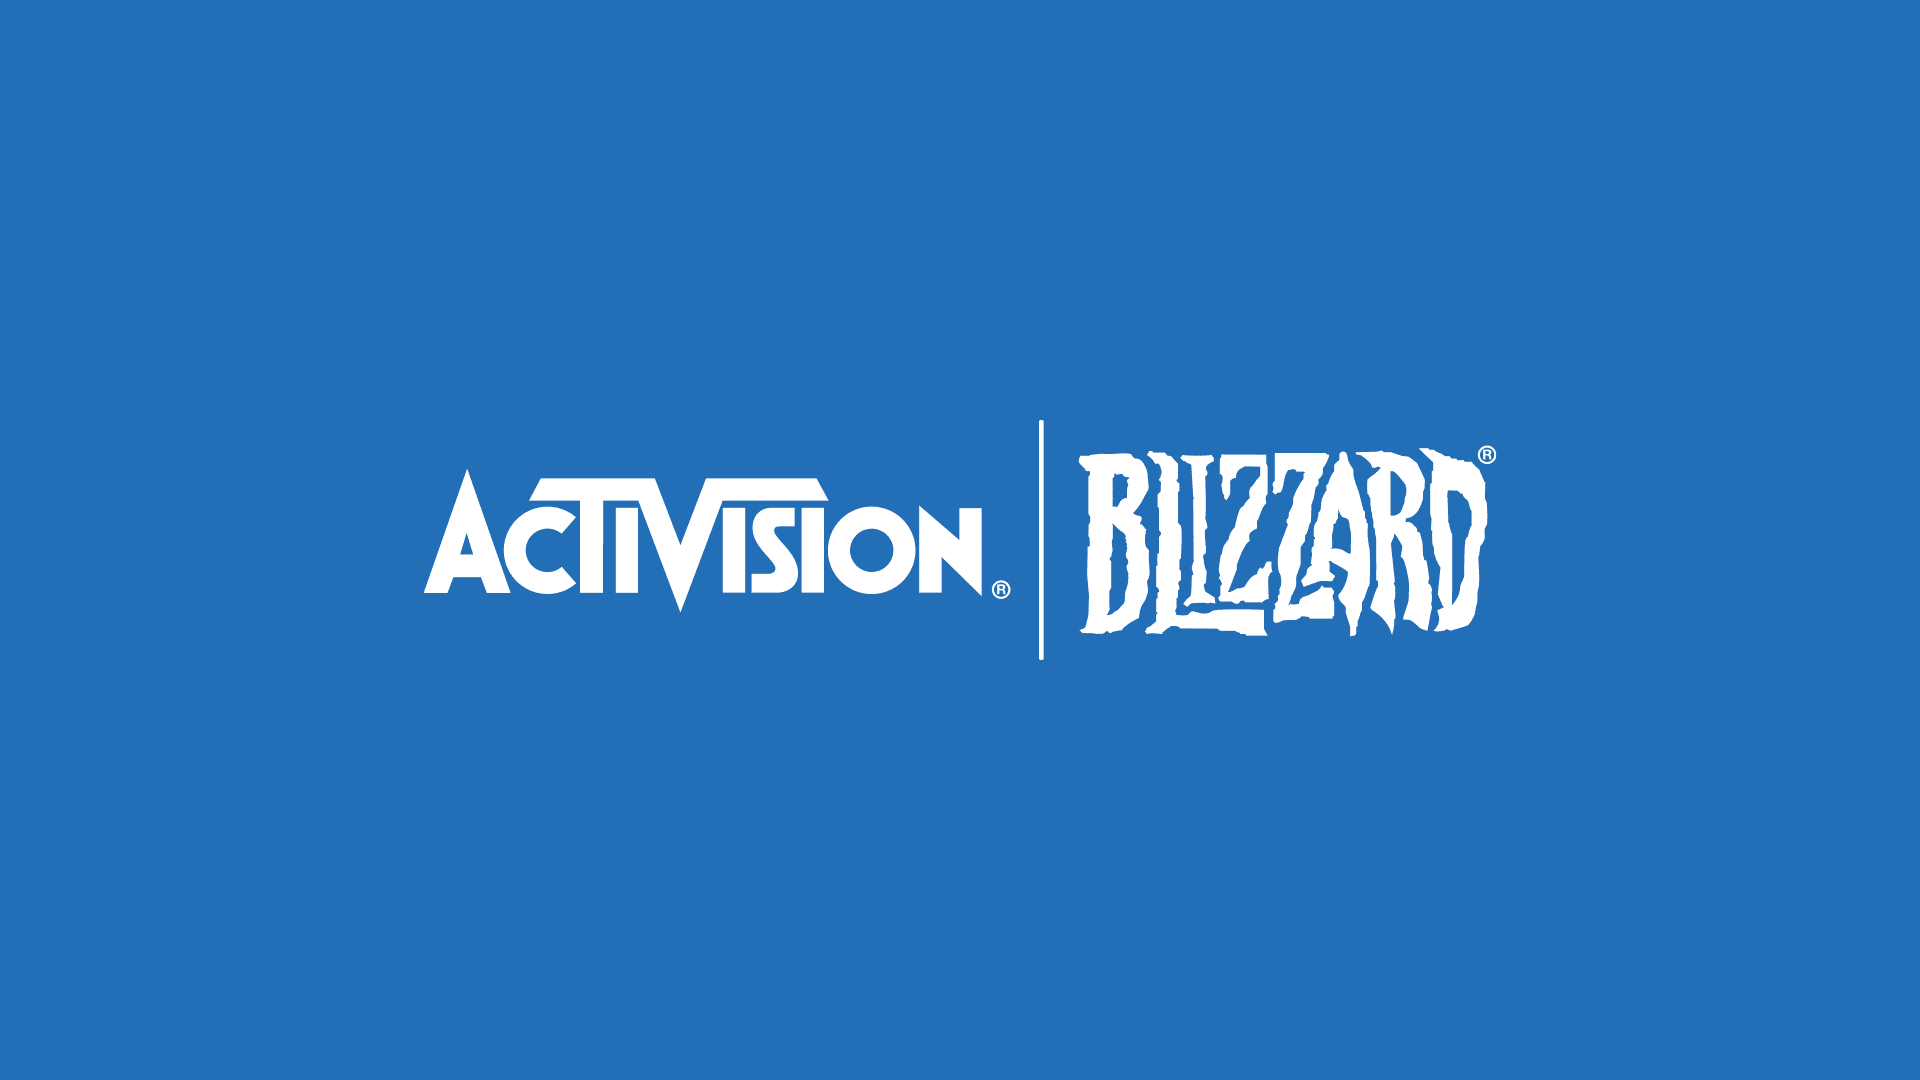 sec-launches-investigation-into-activision-blizzard-over-handling-of-sexual-harassment-discrimination-allegations